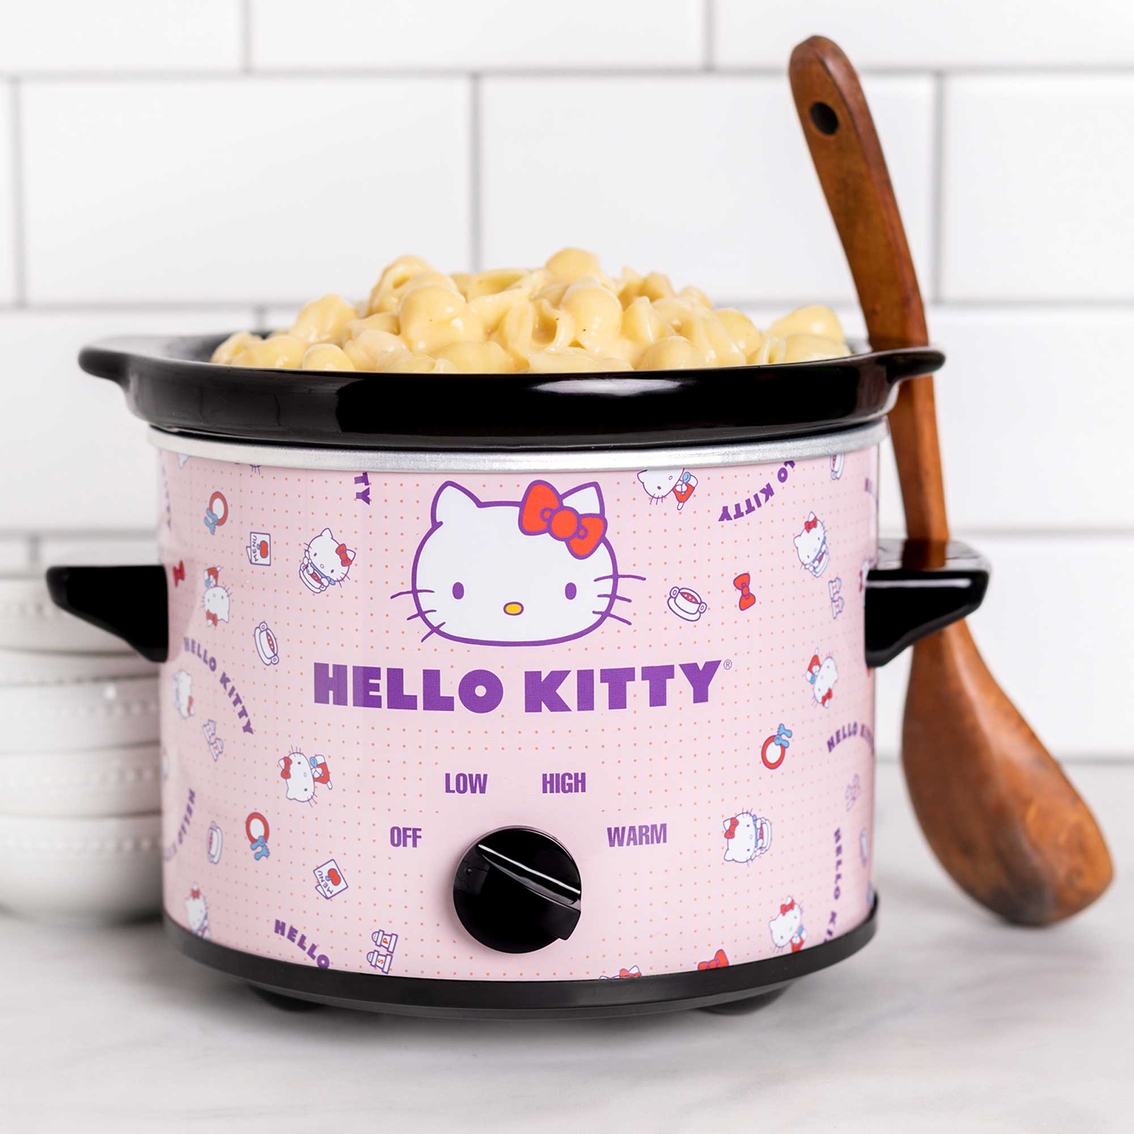 Hello Kitty 2 Quart Slow Cooker - Image 4 of 5